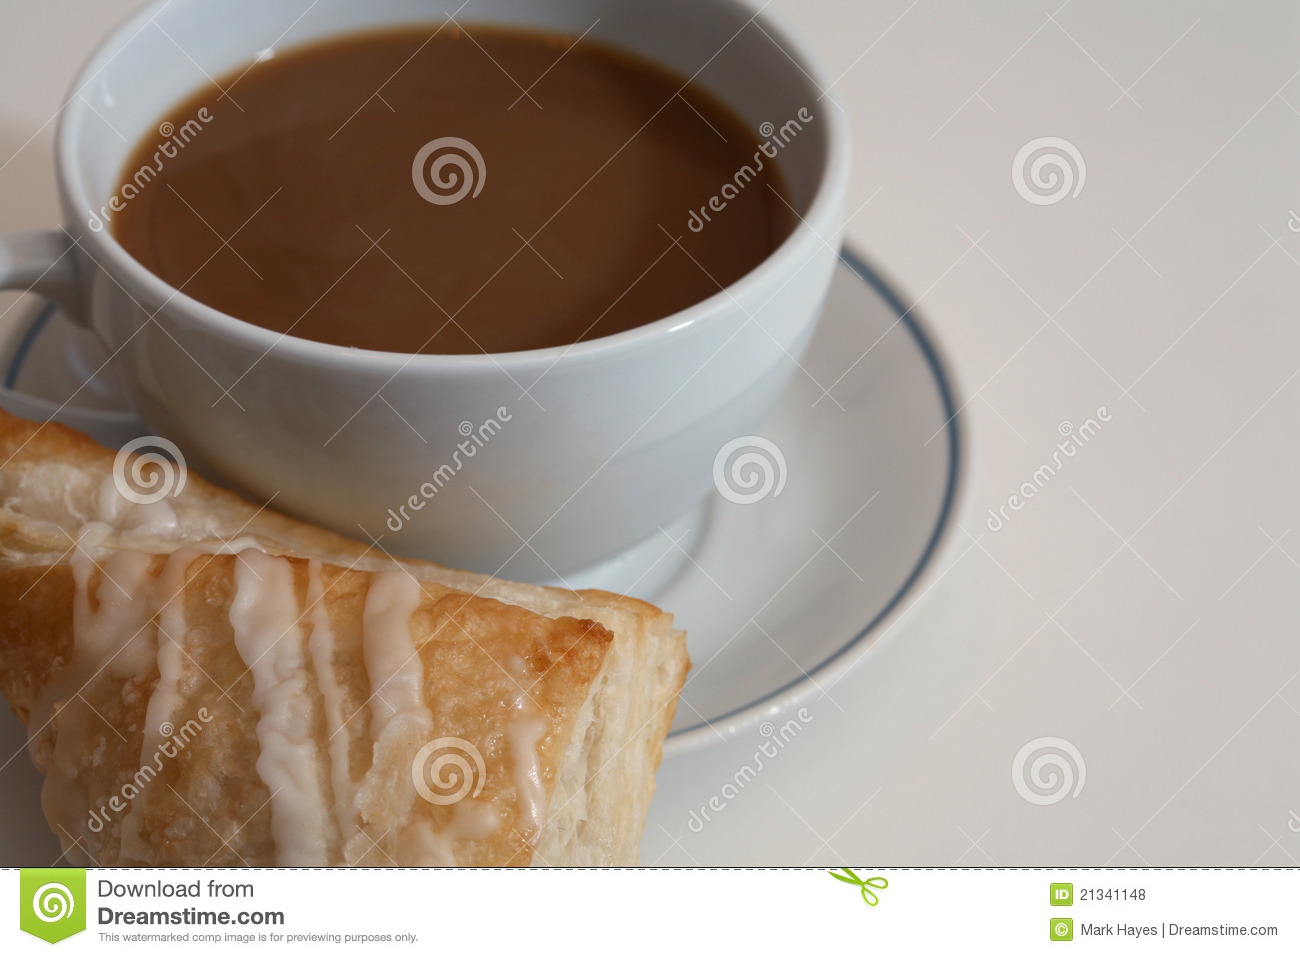 Coffee And Pastry On White Royalty Free Stock Photos   Image  21341148